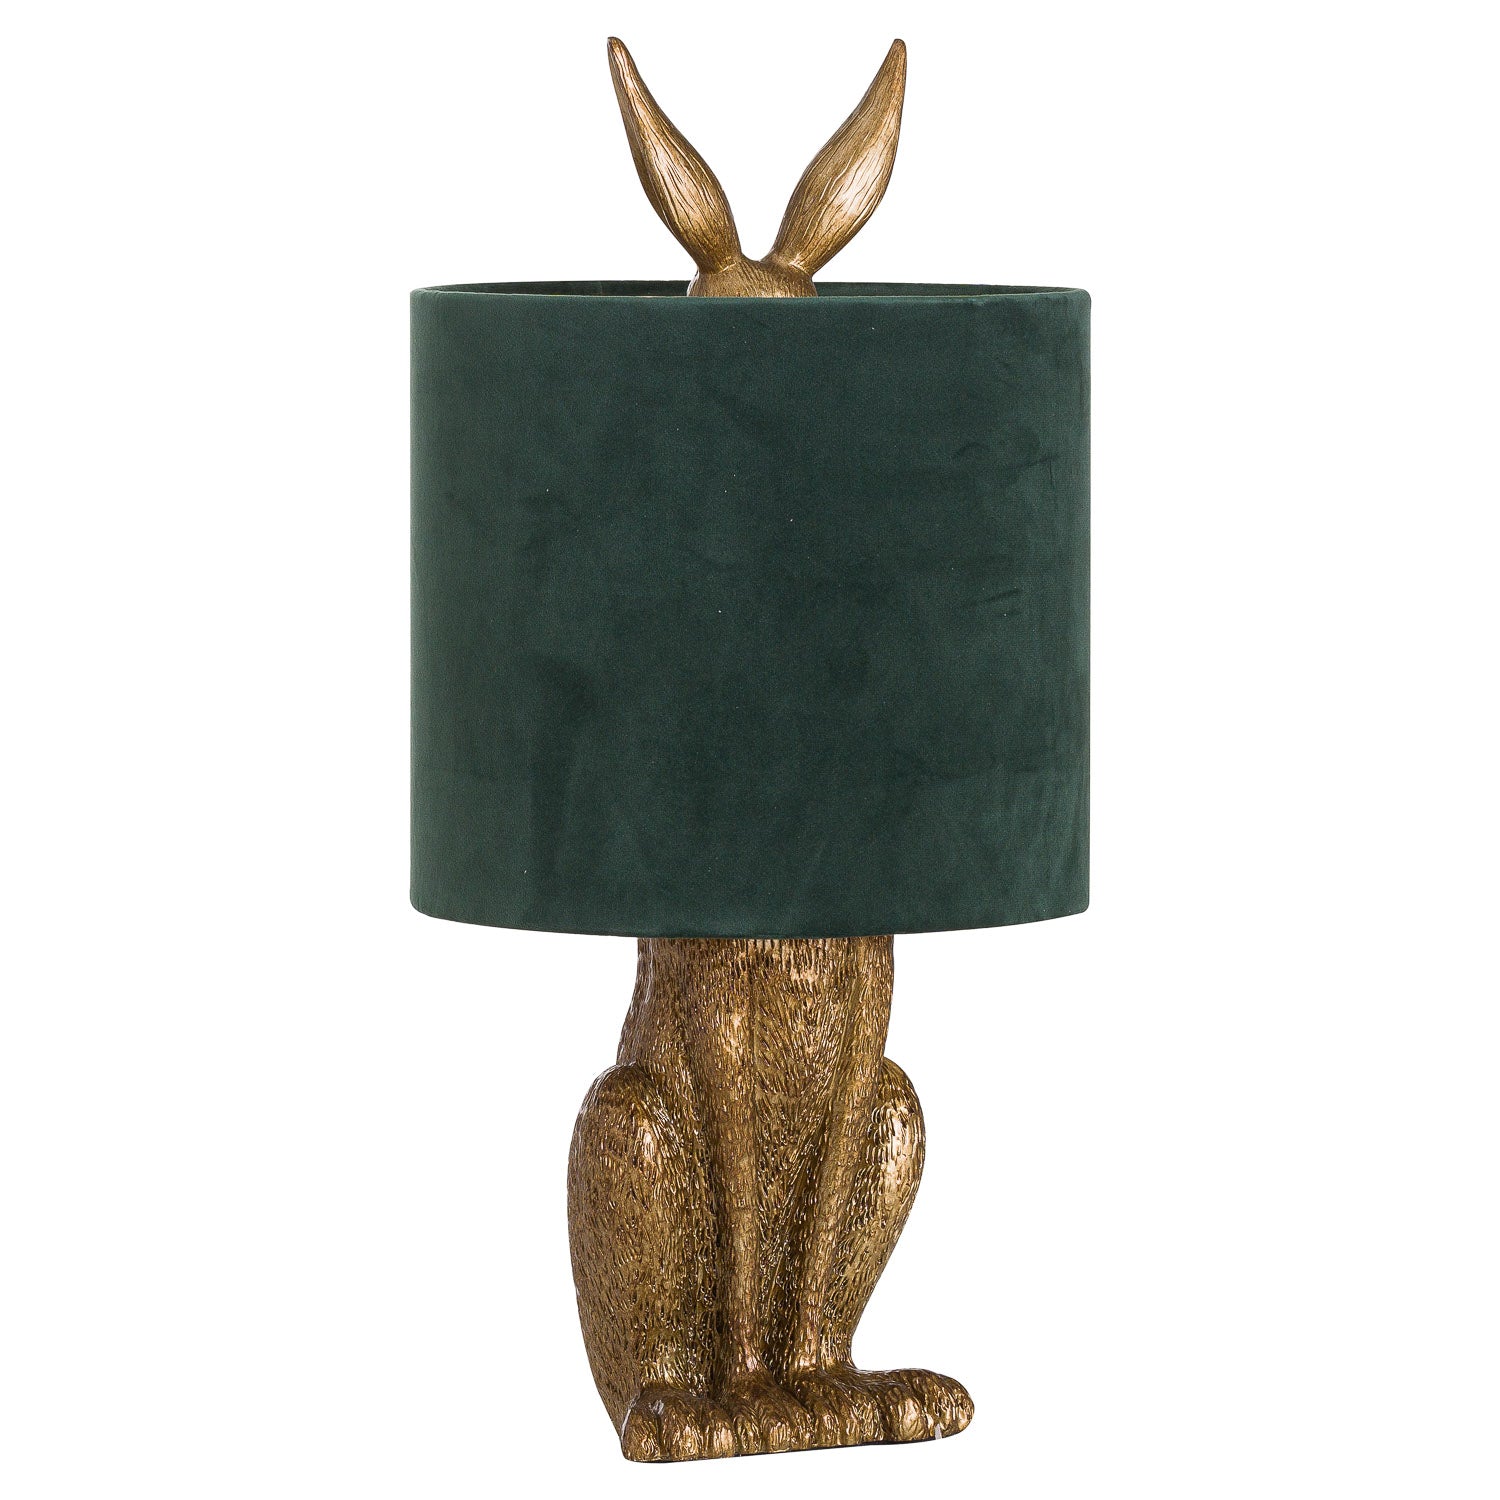 View Antique Gold Hare Table Lamp With Green Velvet Shade information